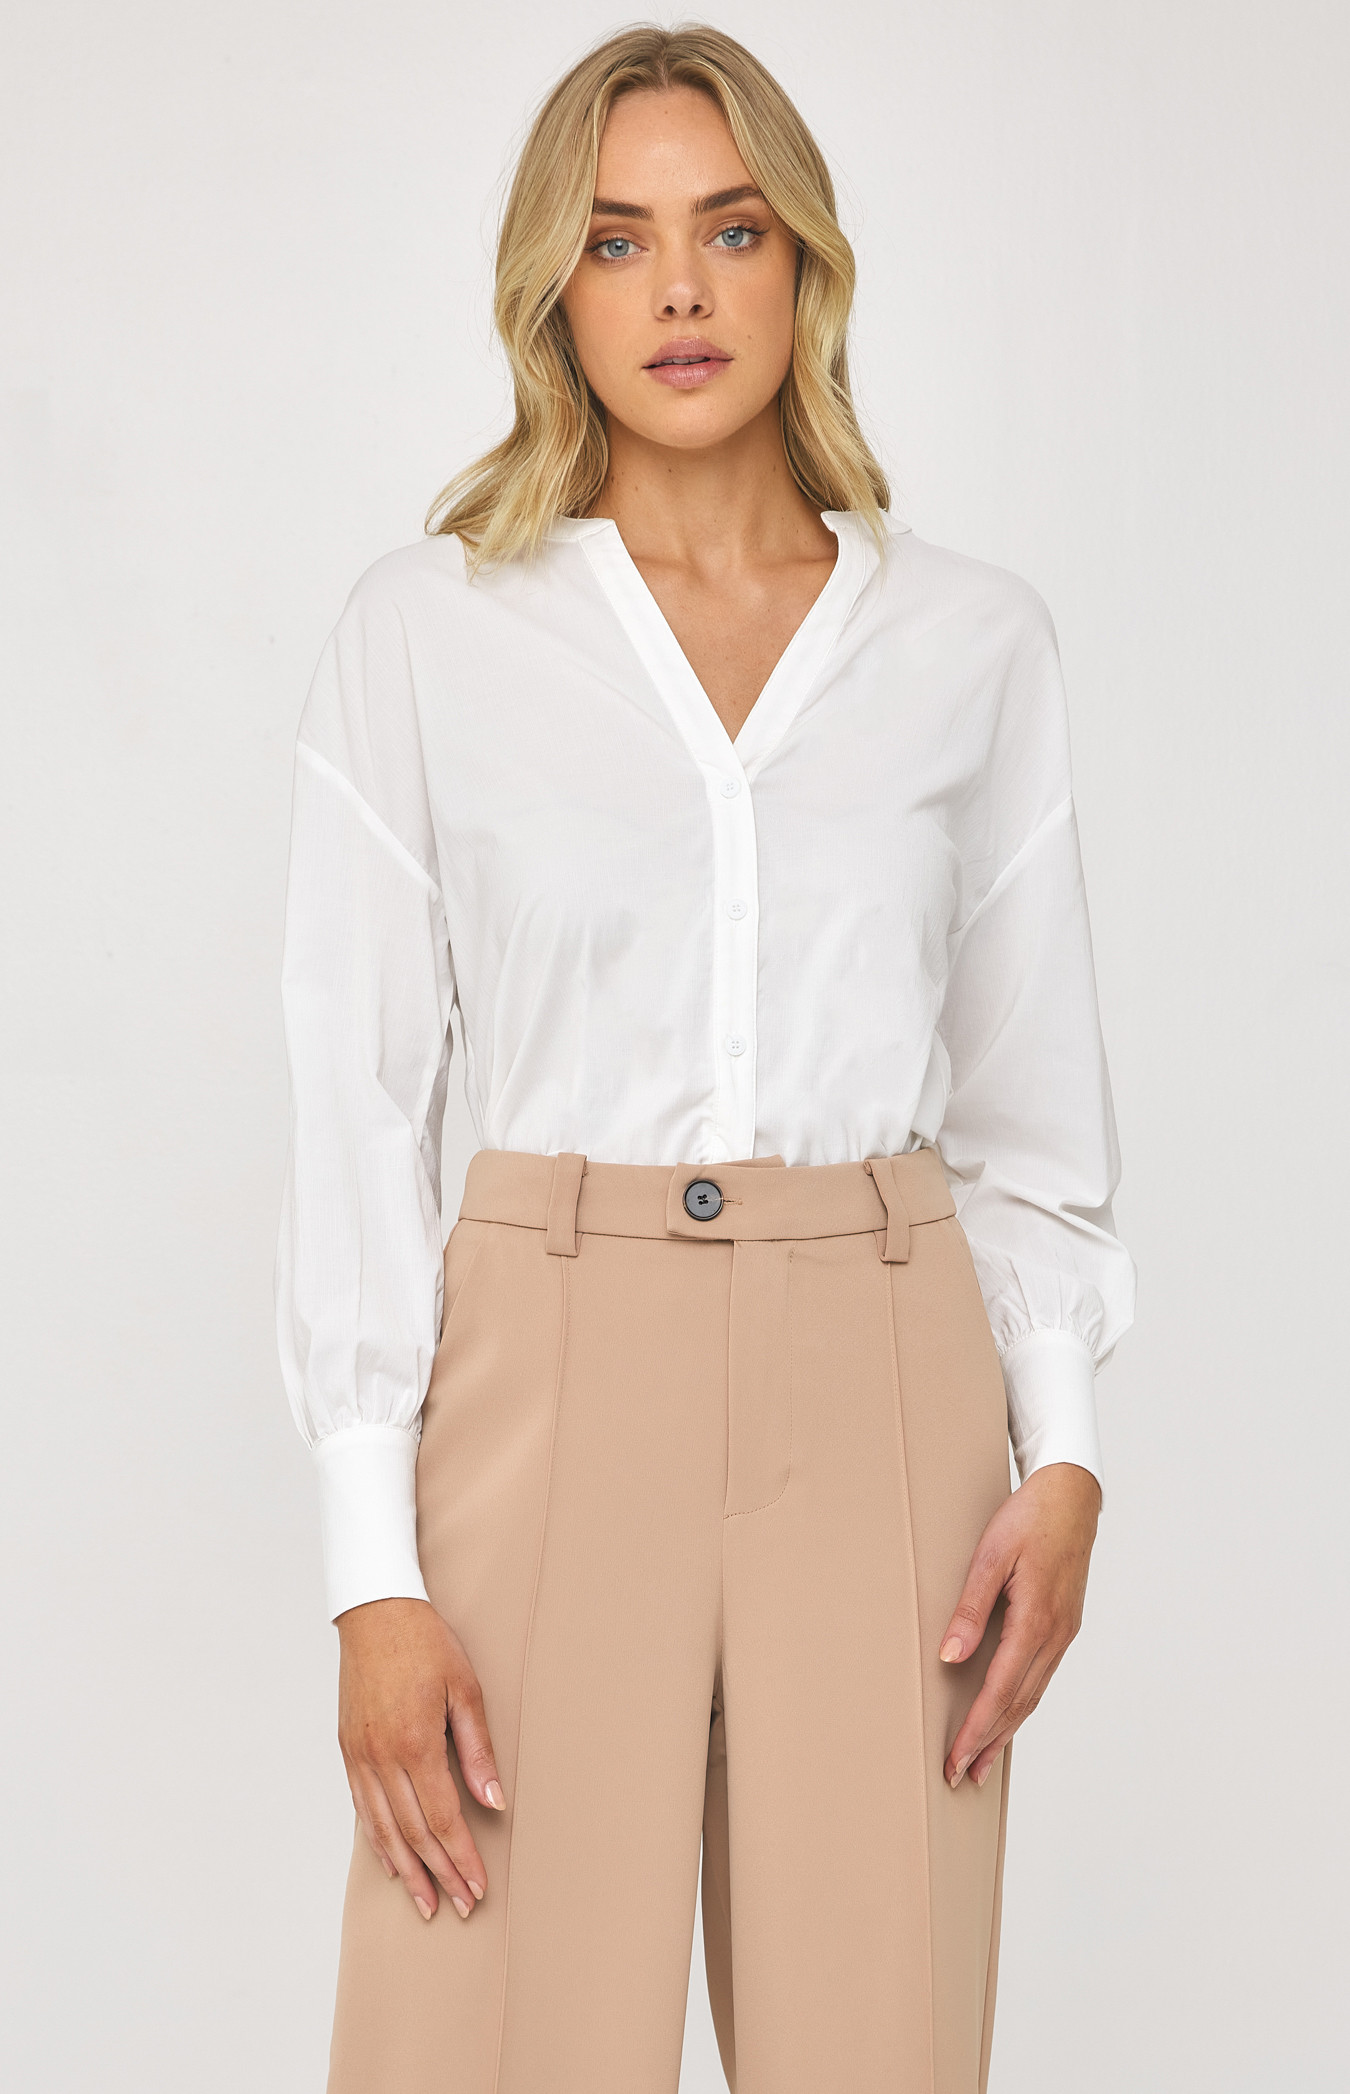 Textured Shirt with Band Collar and Bubble Sleeves (STO602A)